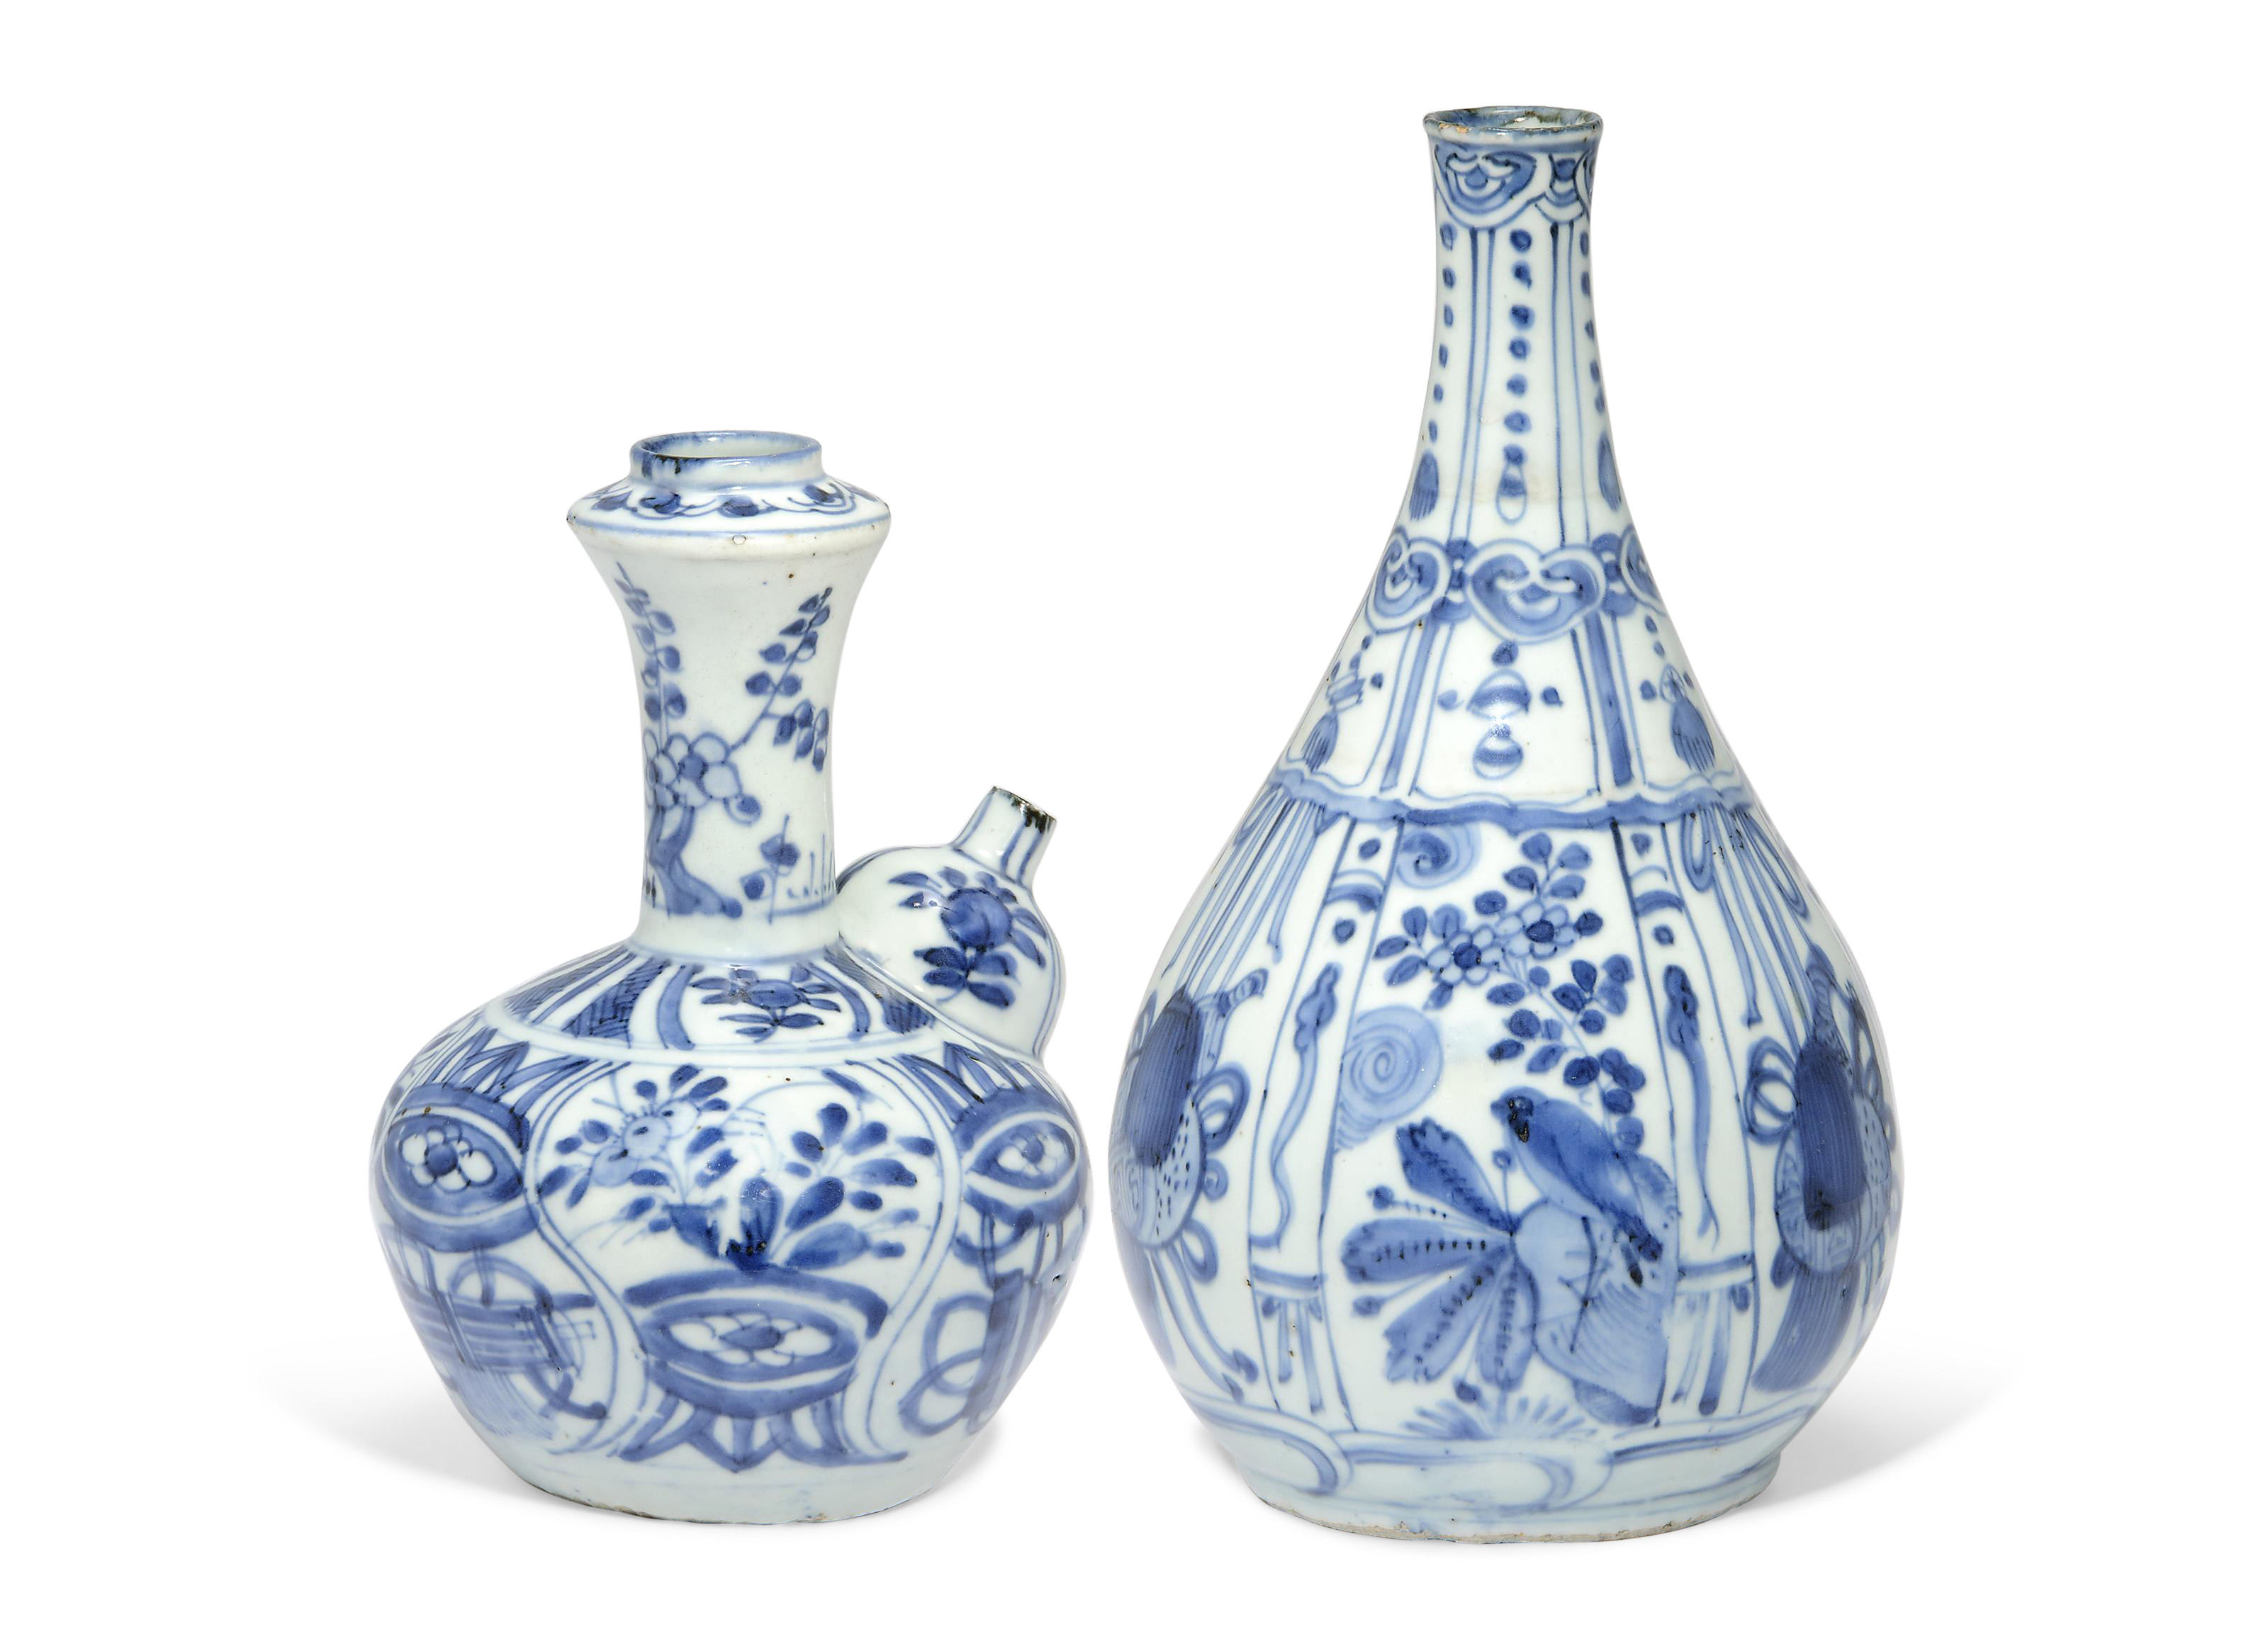 light blue ceramic vase of a blue and white kendi and a bottle vase wanli period 1573 1619 throughout a blue and white kendi and a bottle vase wanli period 1573 1619 christies